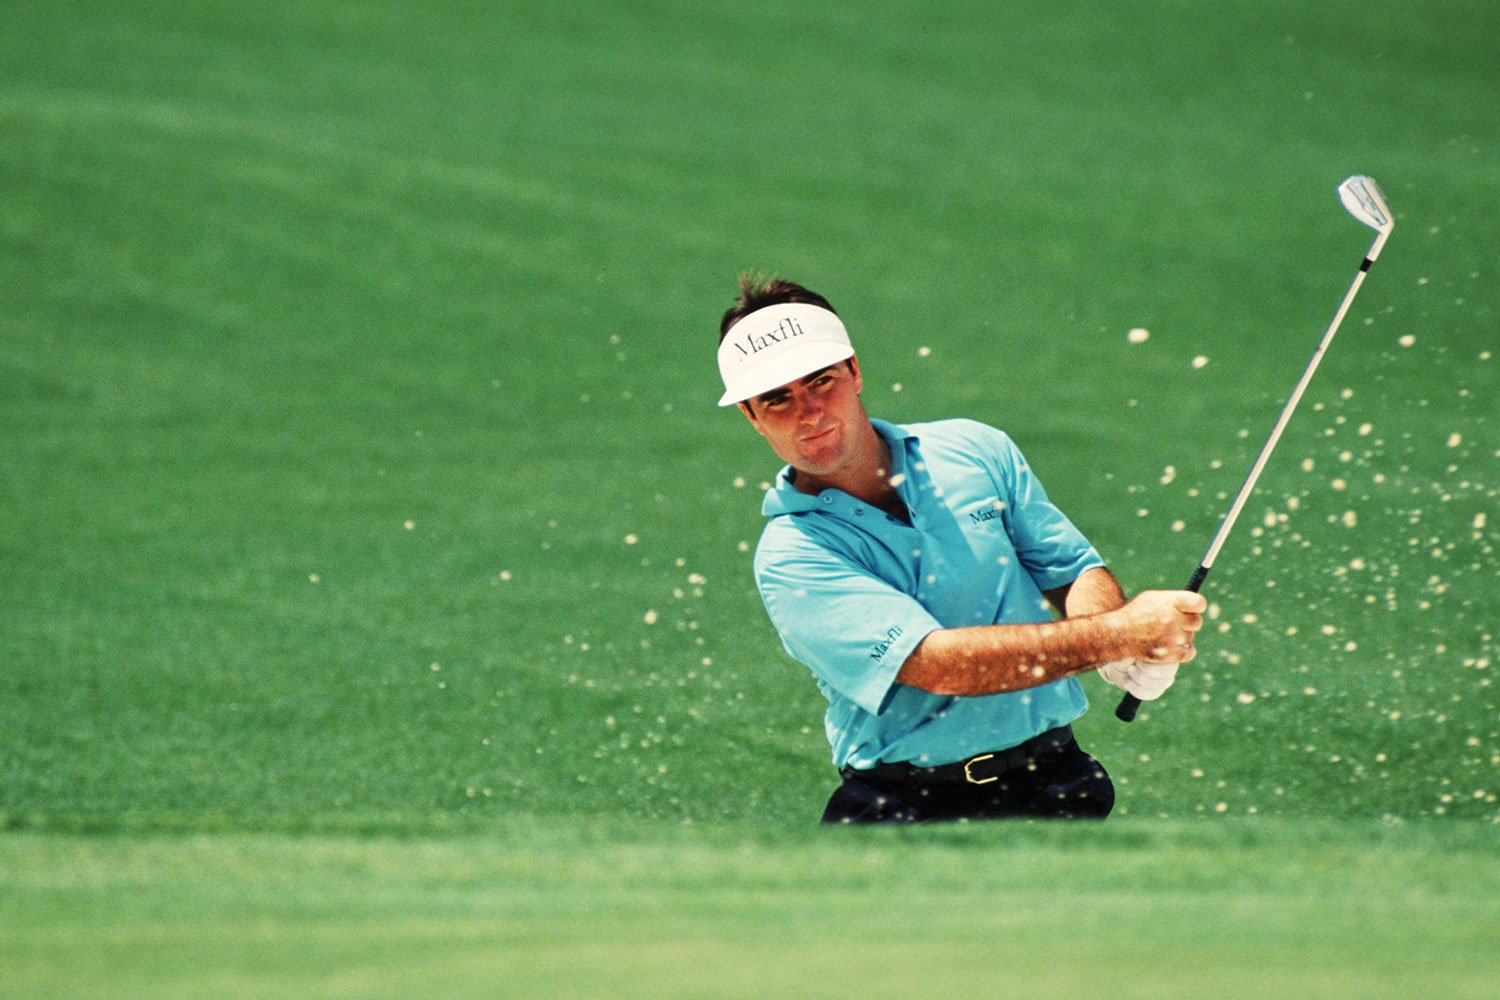 Parry led the 1992 Masters by three strokes with 16 holes to play before sharing 13th place behind Fred Couples.